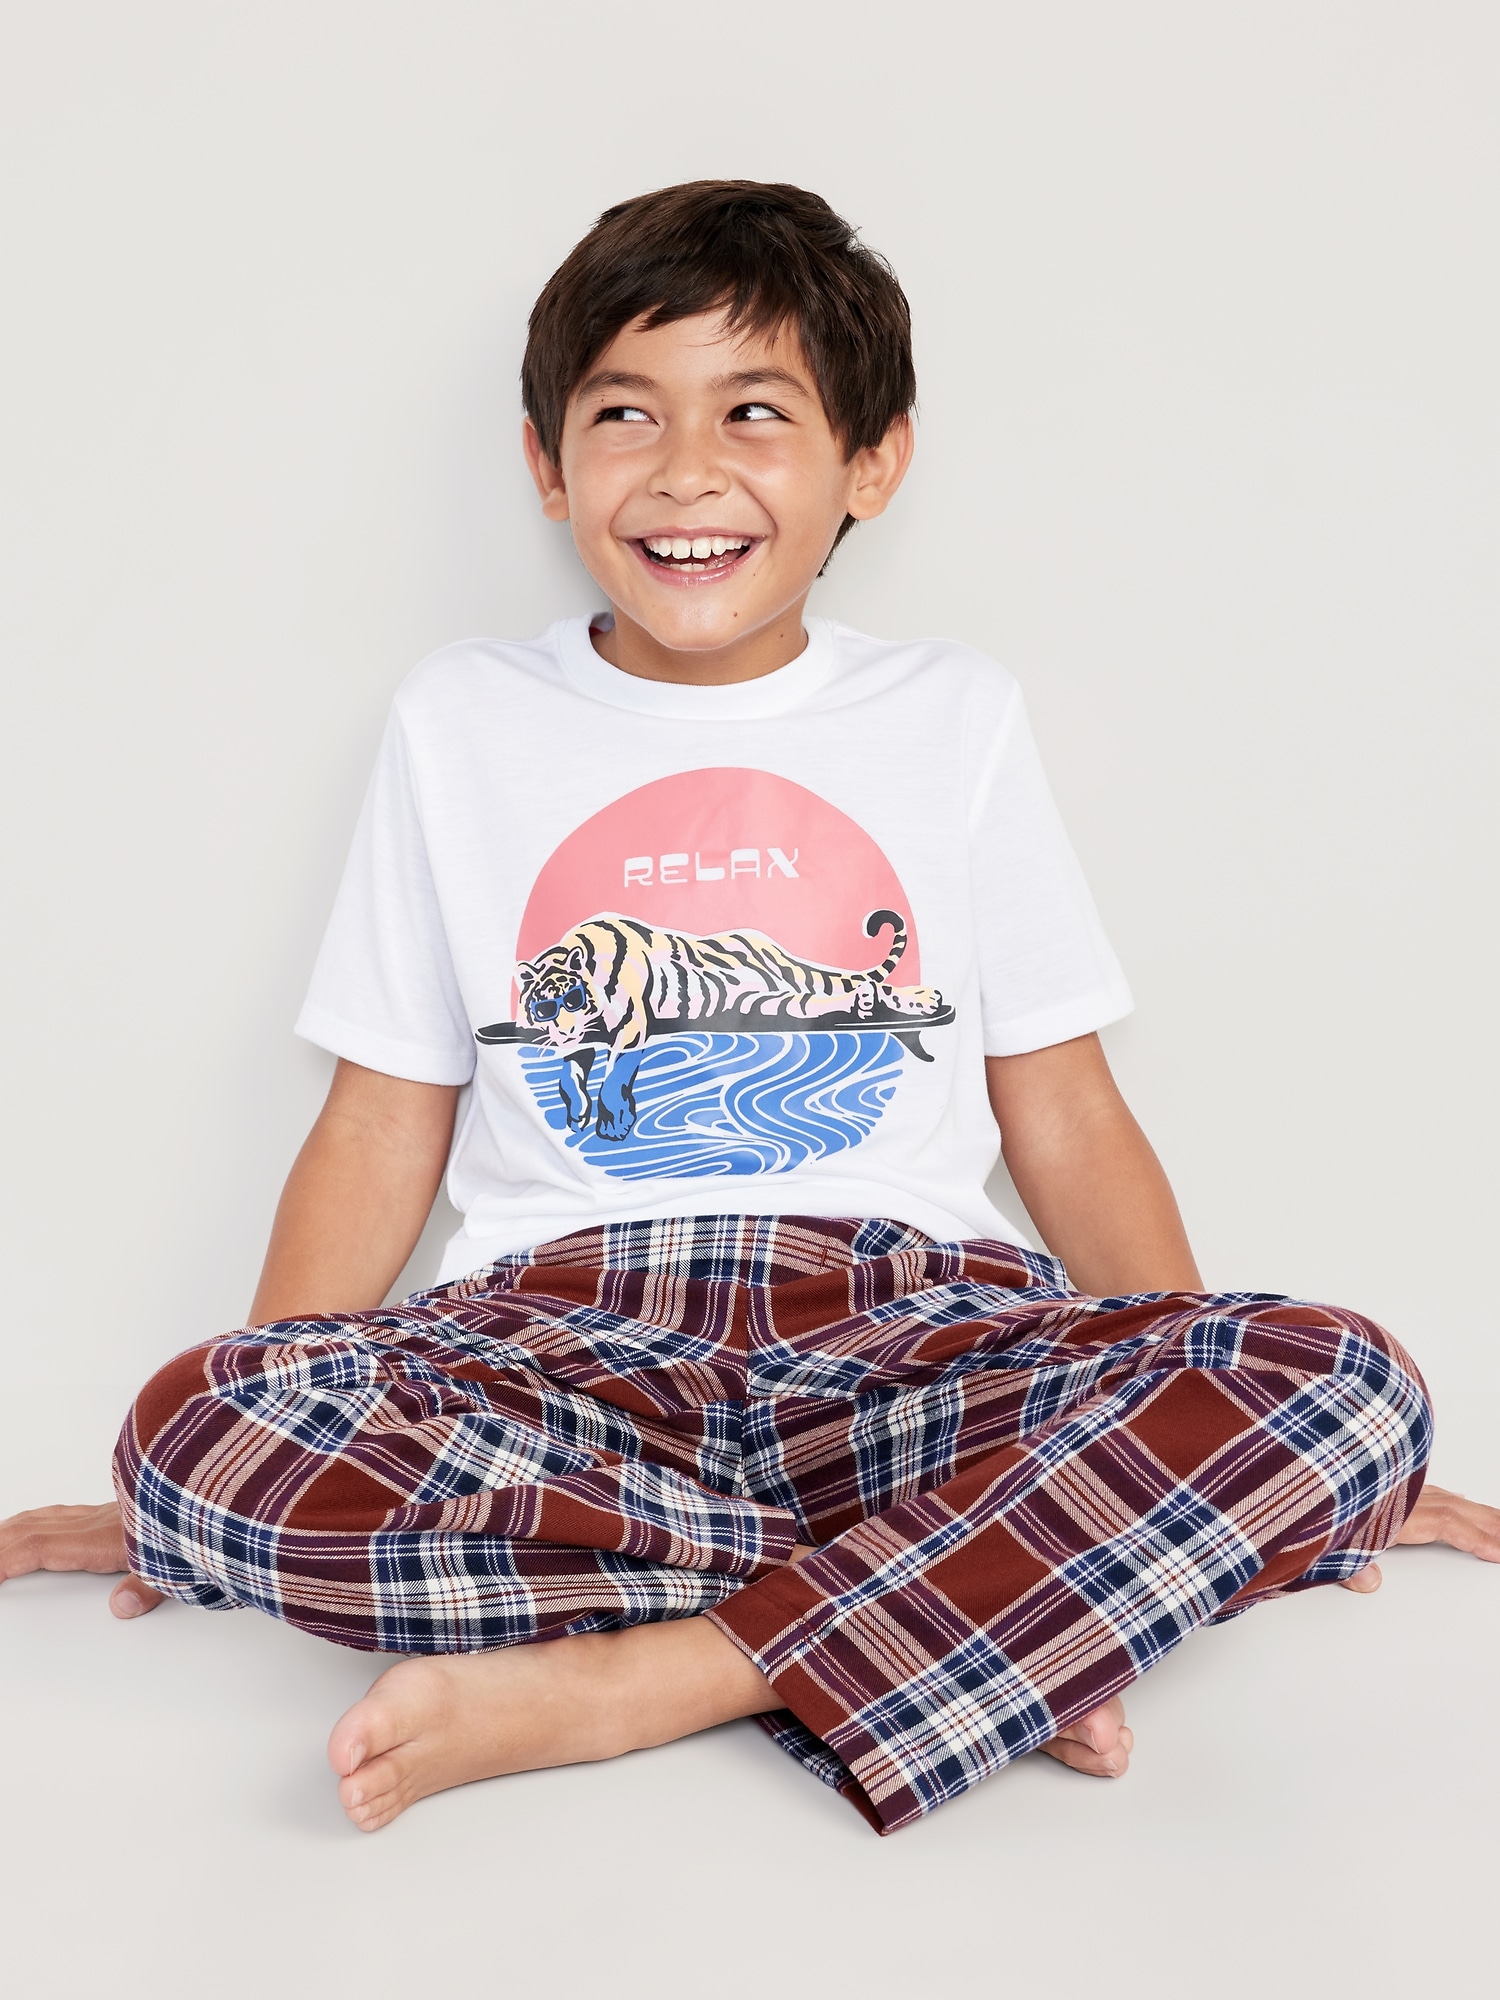 Straight Printed Flannel Pajama Pants for Boys | Old Navy